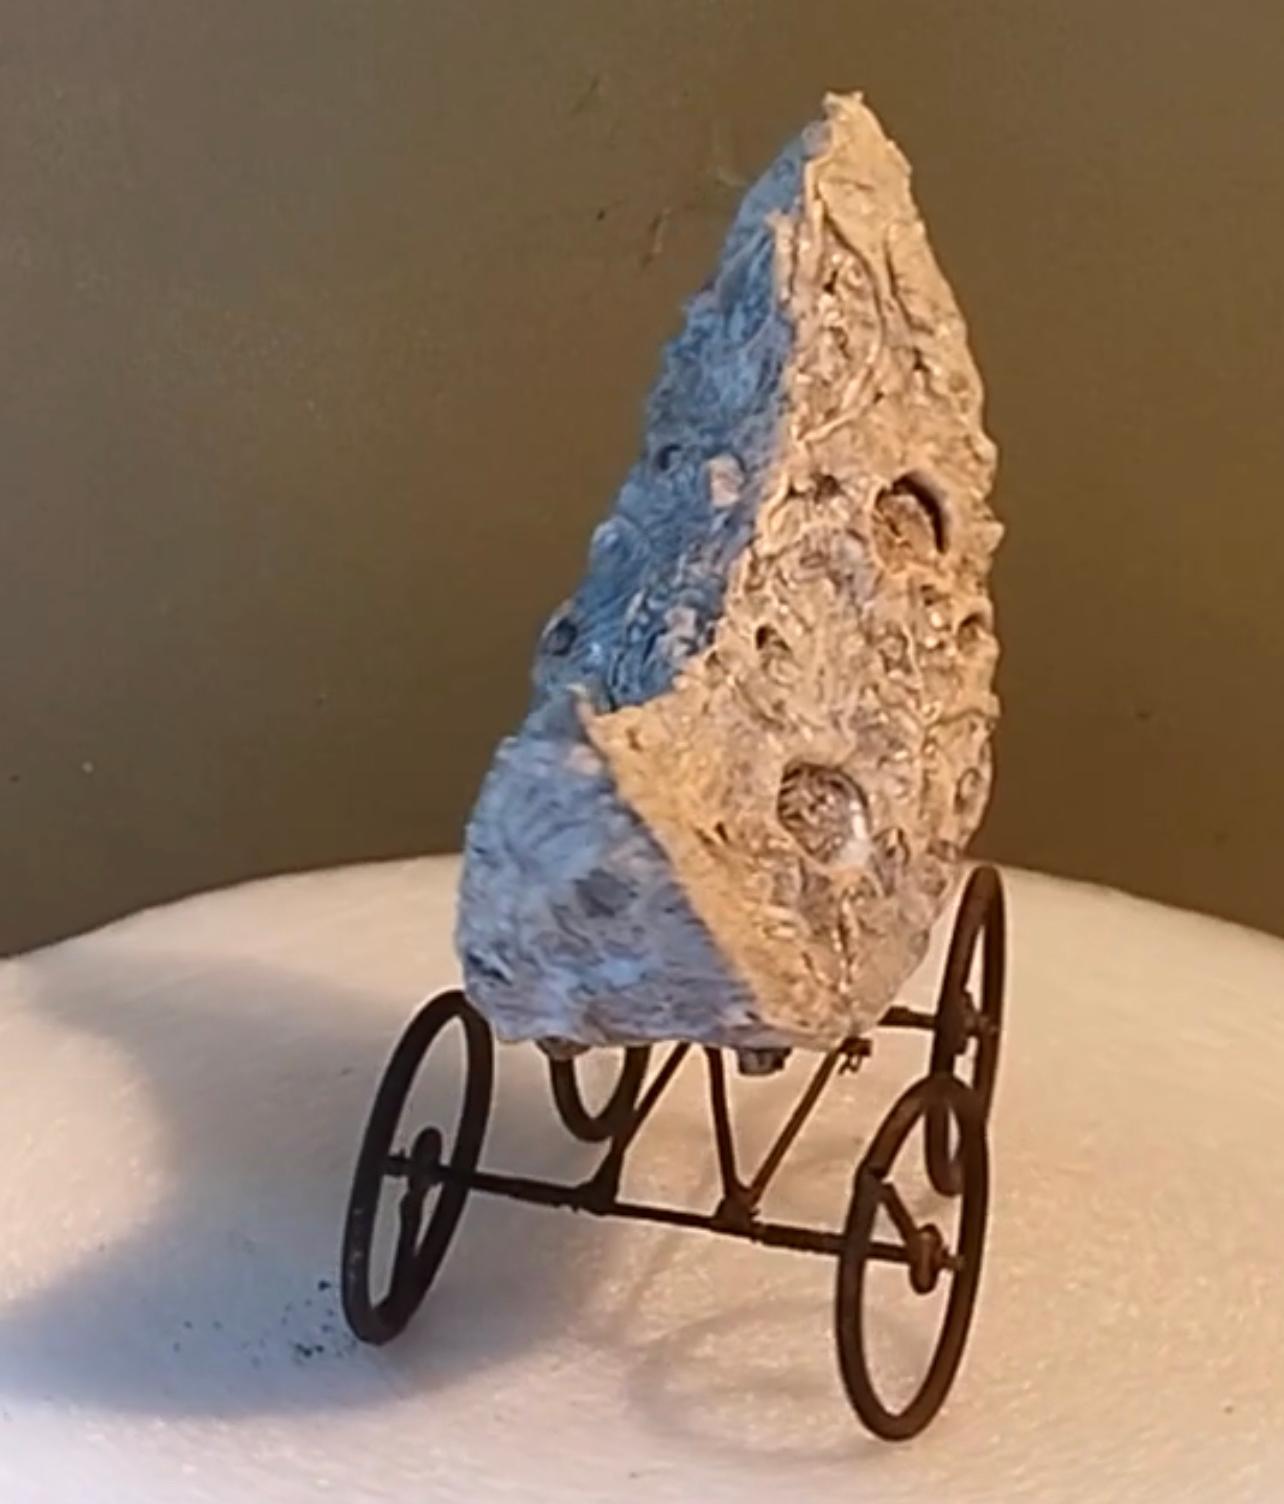 Artist: Jim Pallas (1941)
Title: Grey Moon on One Spoke Wheels
Year: 2009
Medium: Ceramic and steel
Size: 8.5 x 8 x 4 inches
Condition: Excellent
Inscription: Signed and dated.

JIM PALLAS (1941-) American painter, draughtsman, sculptor, and